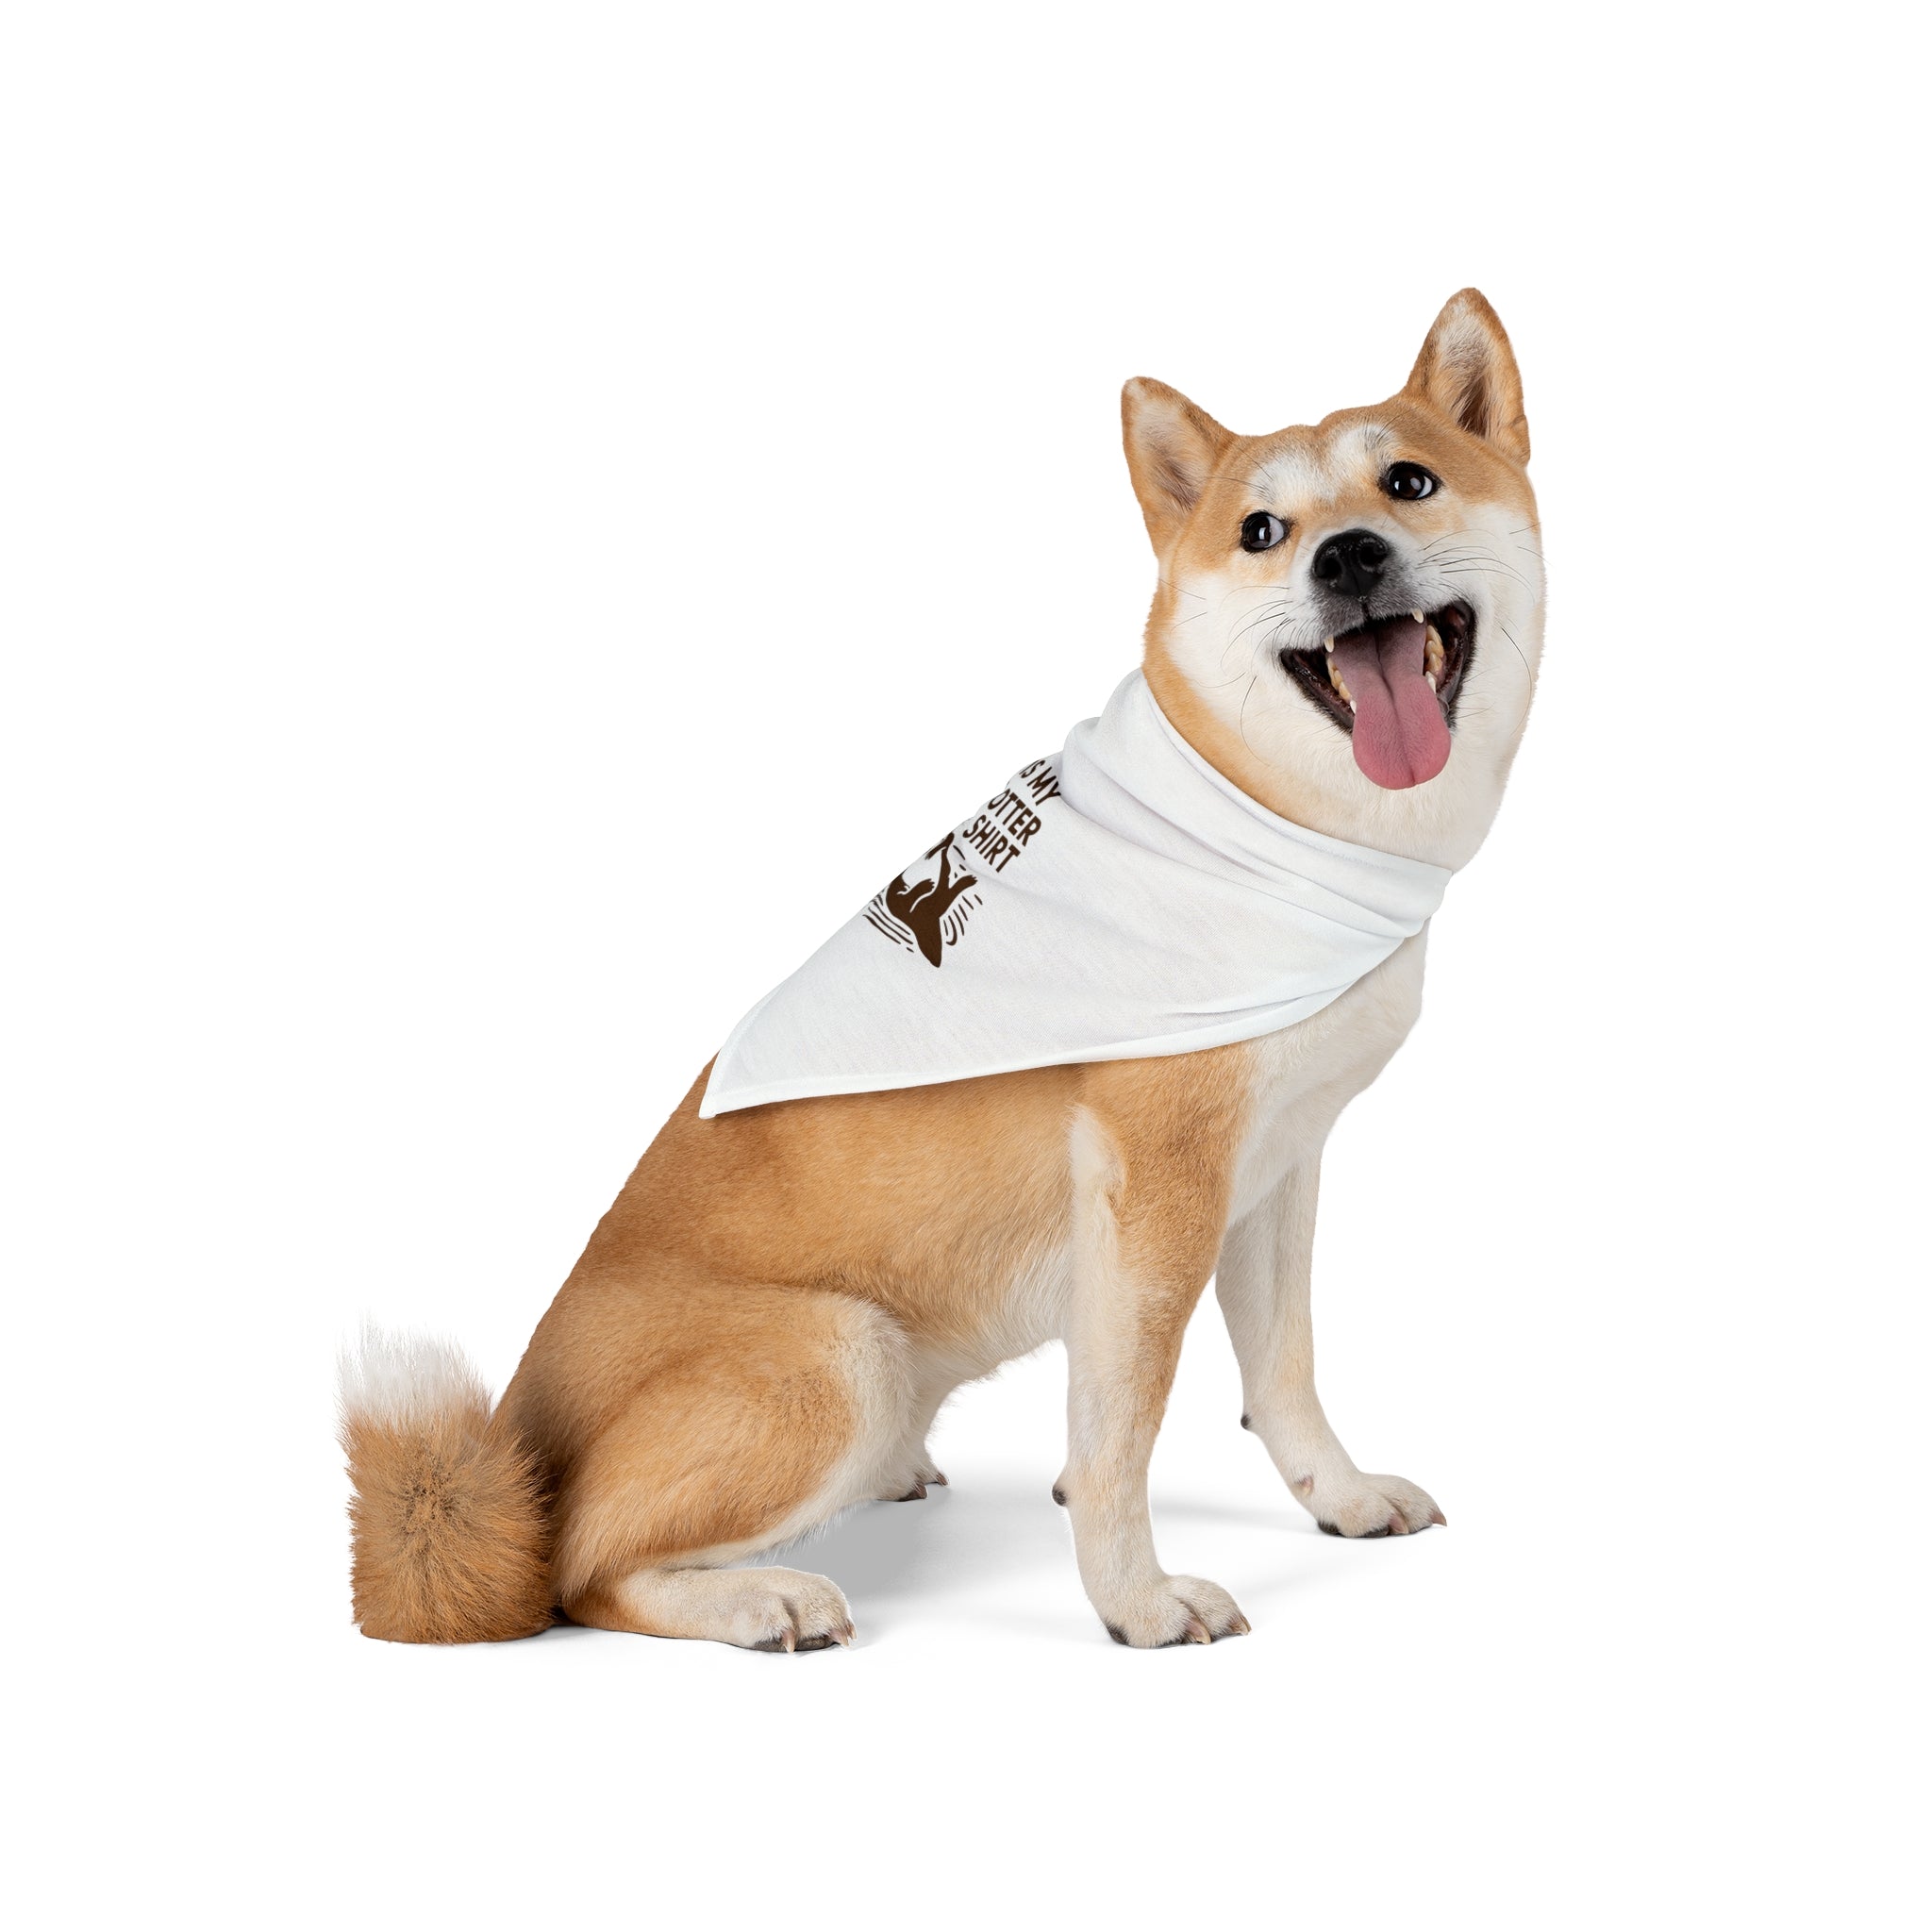 A tan and white dog with a happy expression sits while wearing a My Otter Shirt - Pet Bandana.